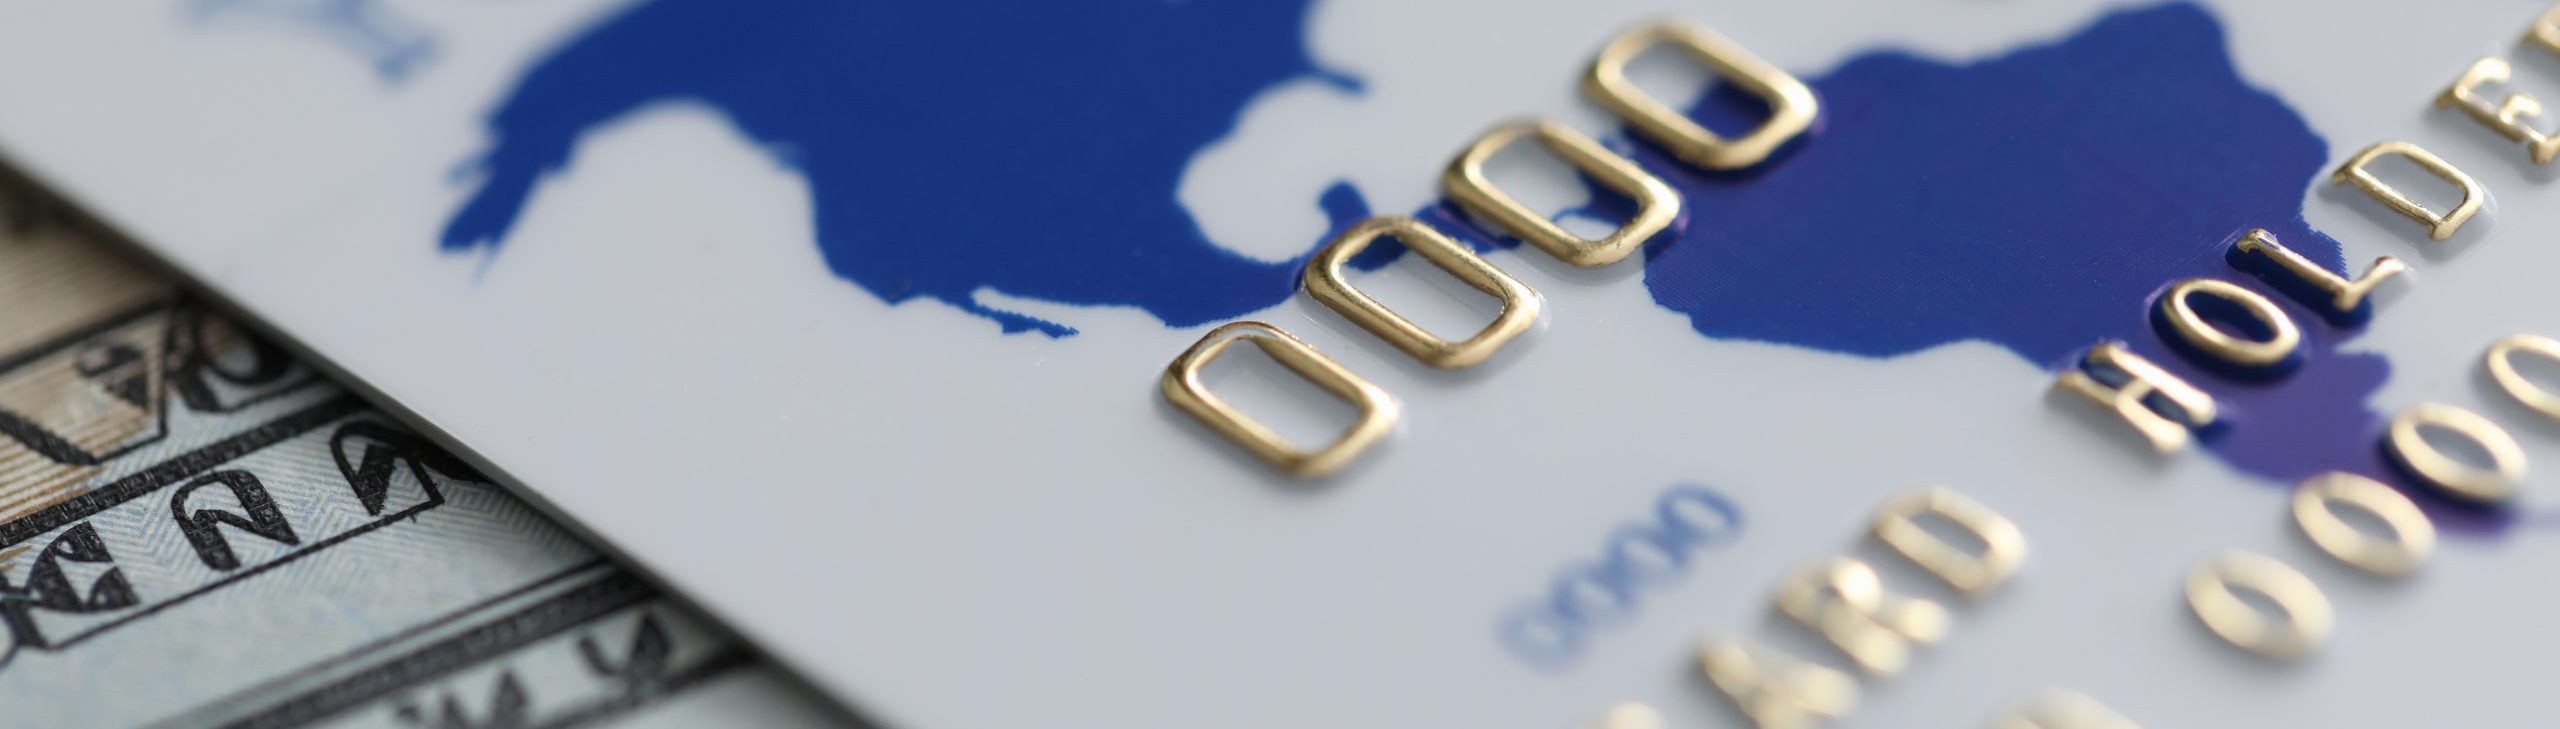 closeup of a credit card and American currency